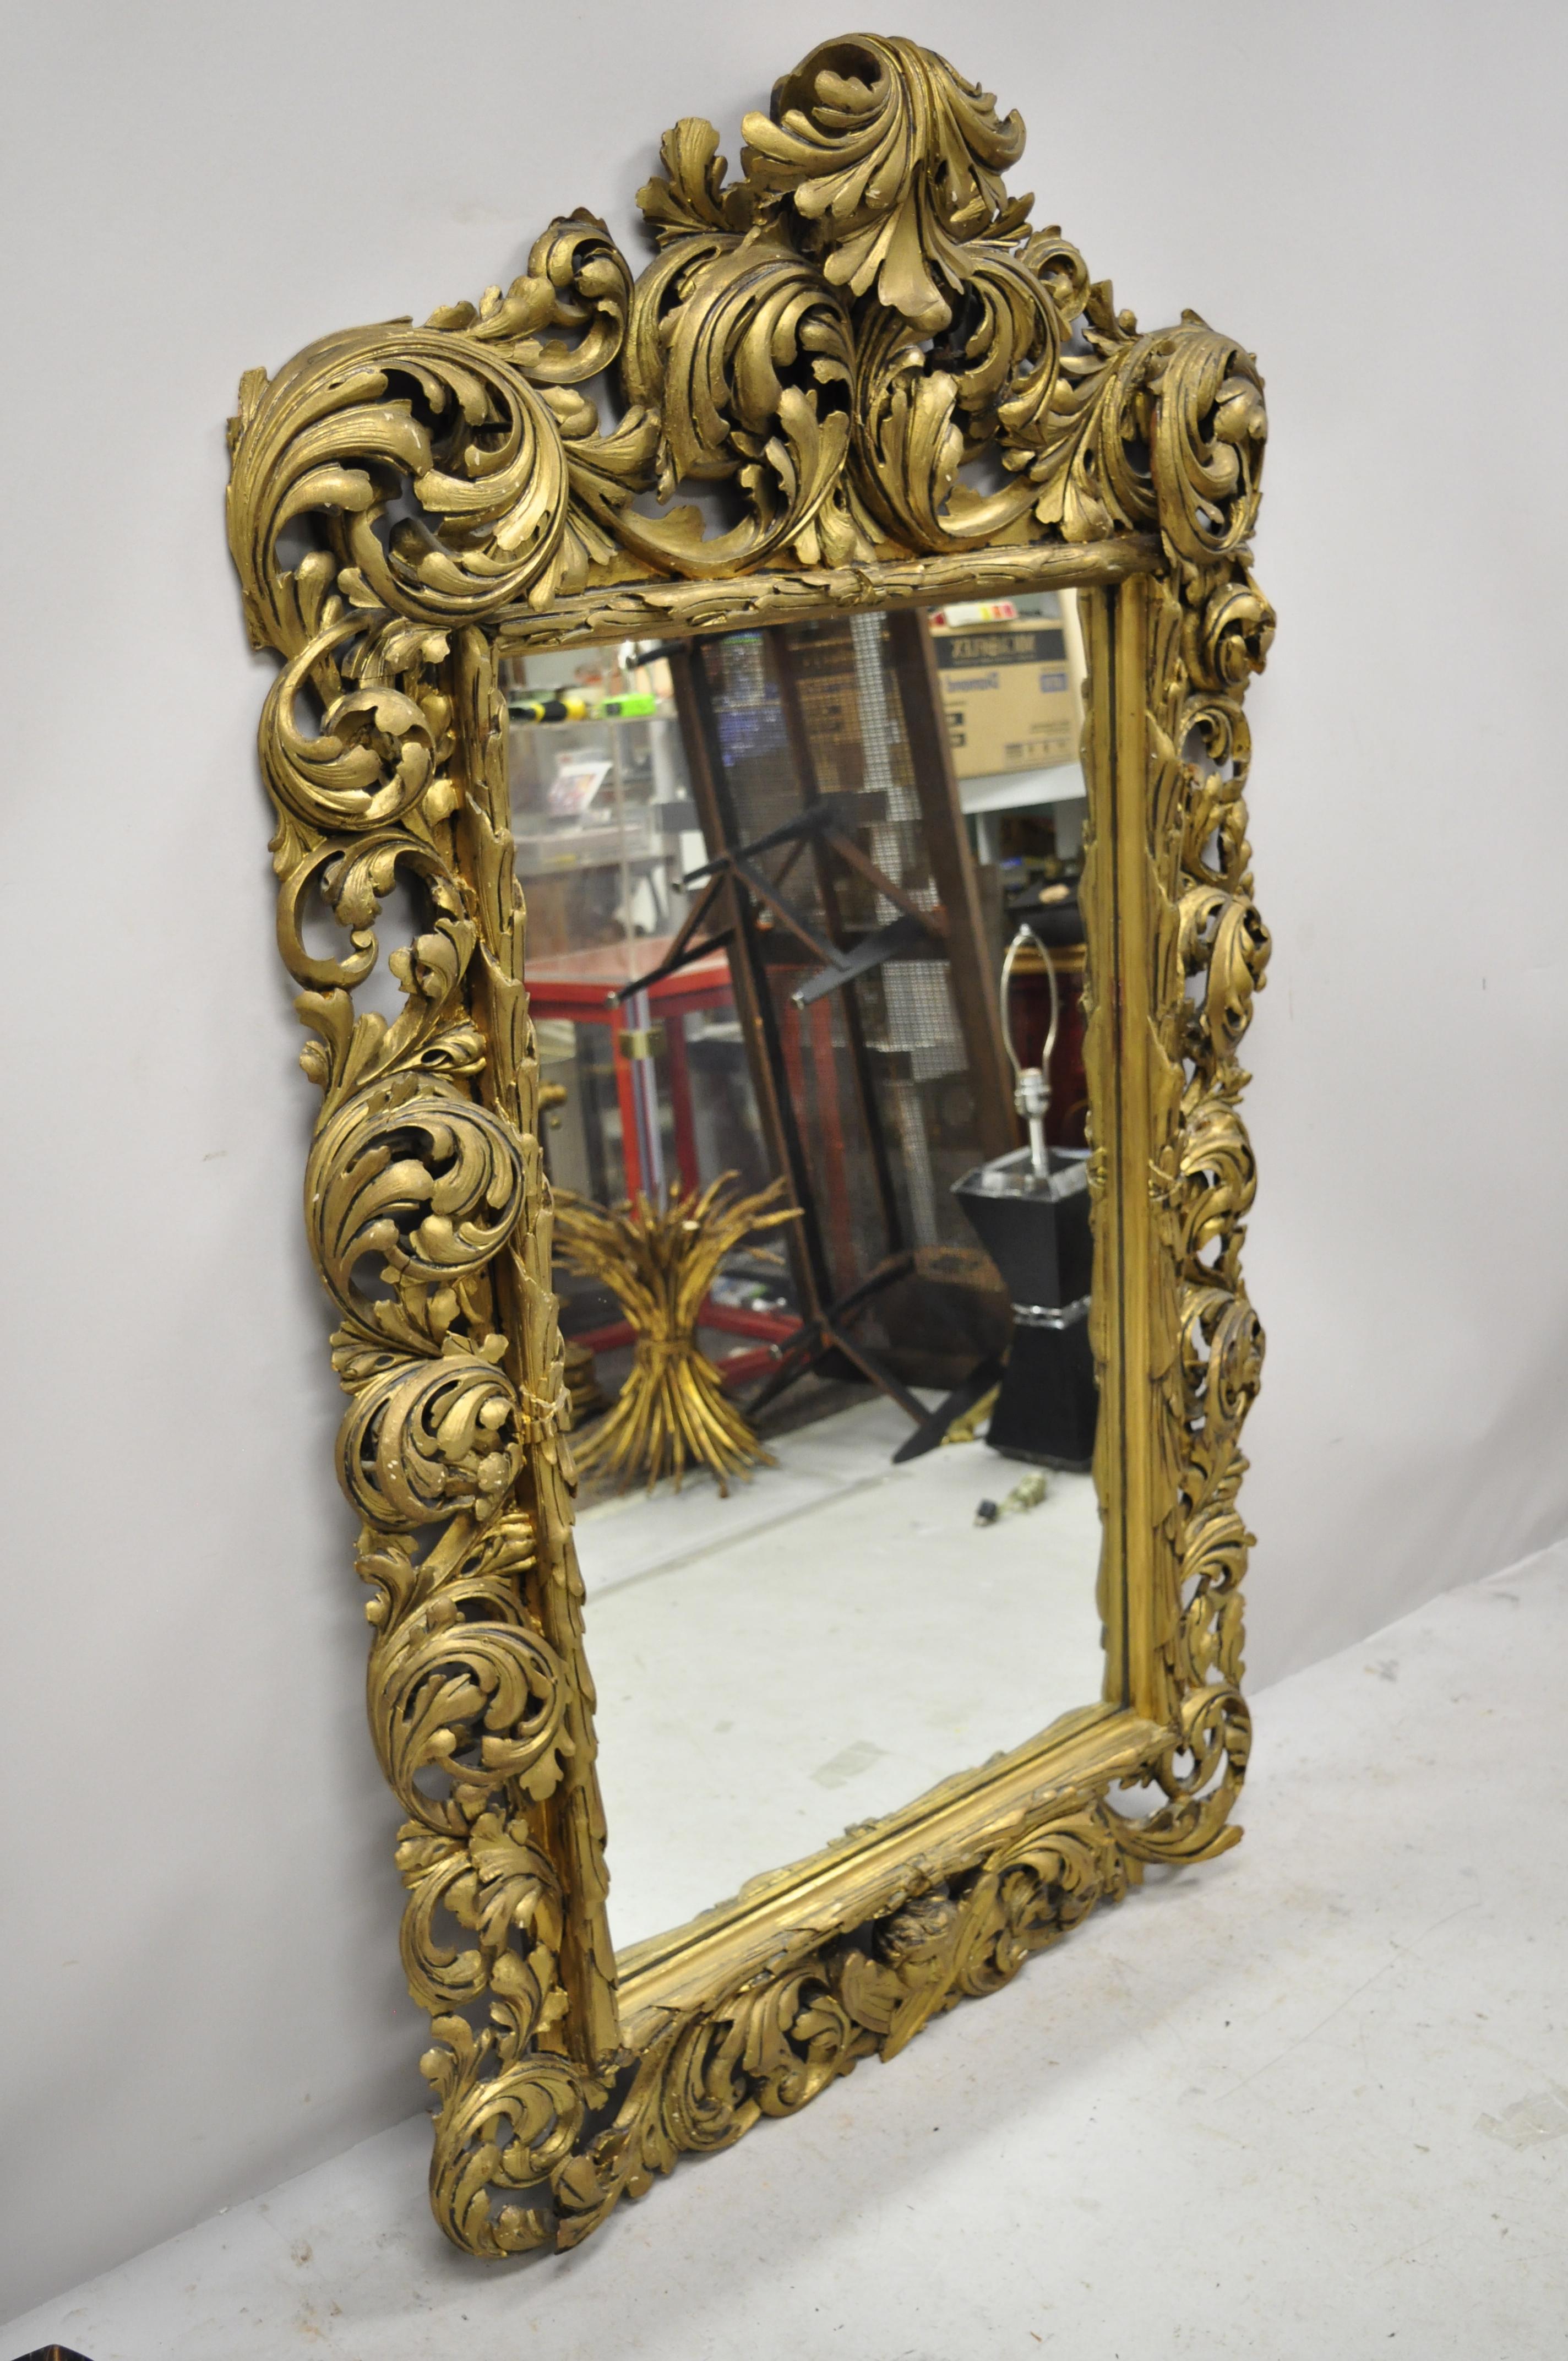 19th century French Rococo gold giltwood relief carved wood acanthus leaf wall mirror. Item features a hand carved wood frame, distressed gold gilt finish, pierce carved acanthus leaf frame, very nice antique item, circa 19th century. Measurements: